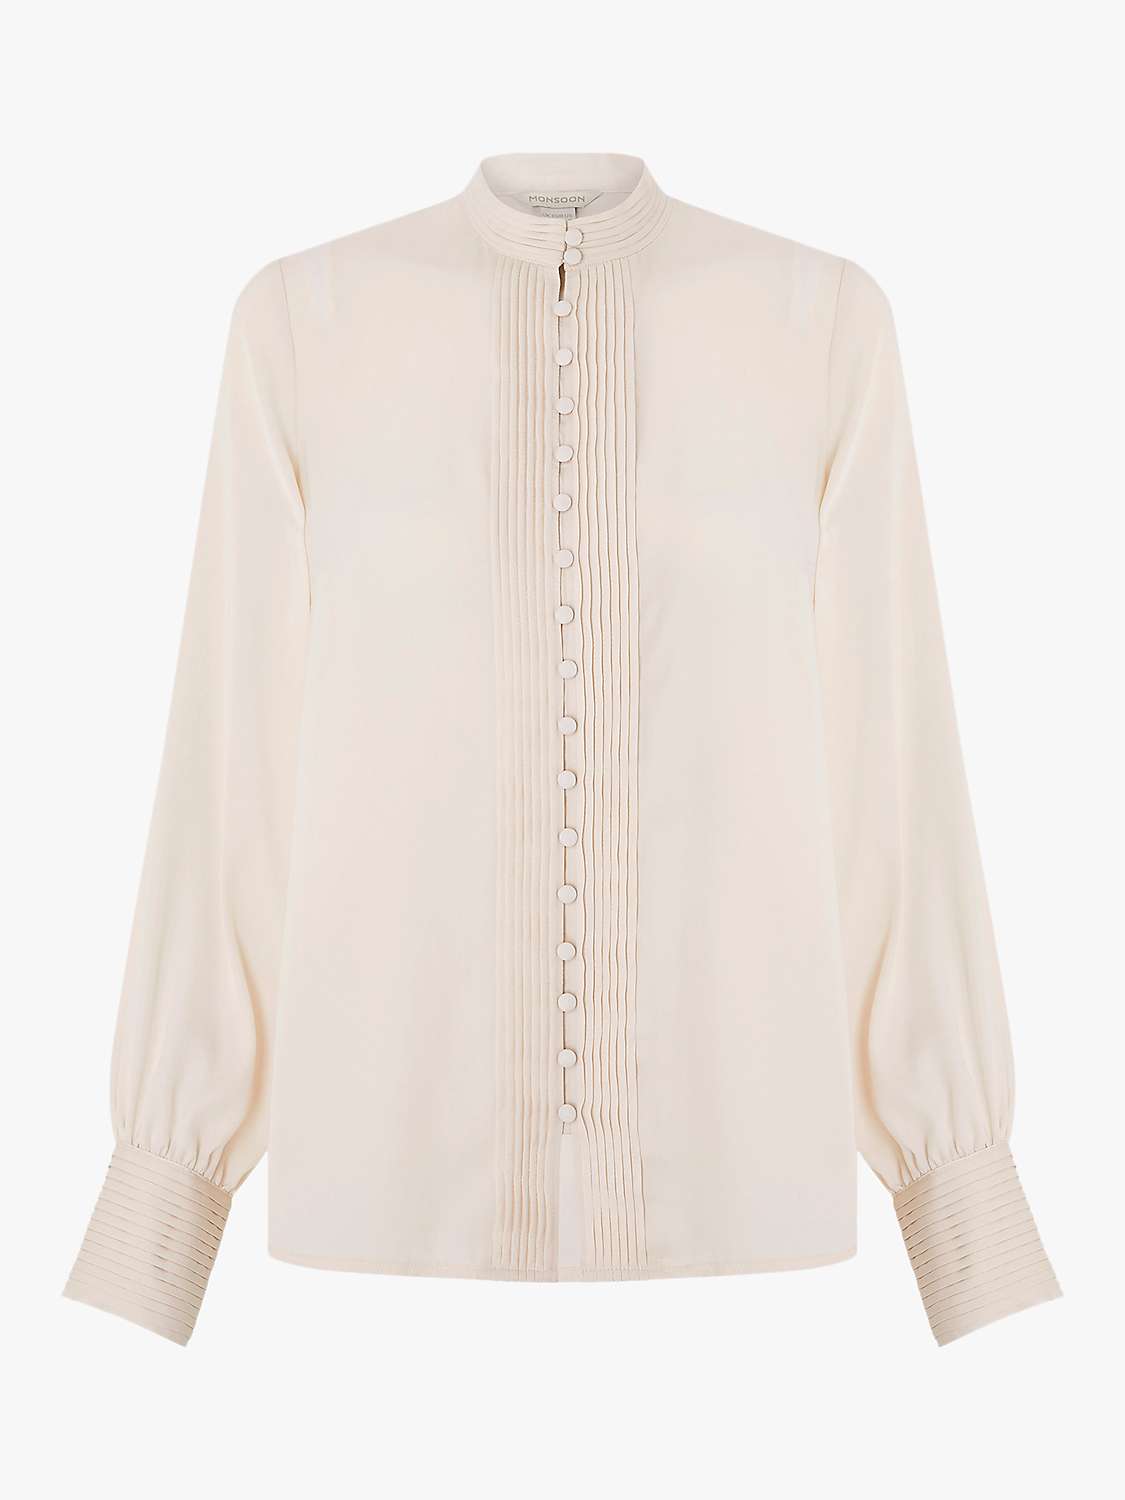 Monsoon Pleated Button Blouse, Cream at John Lewis & Partners